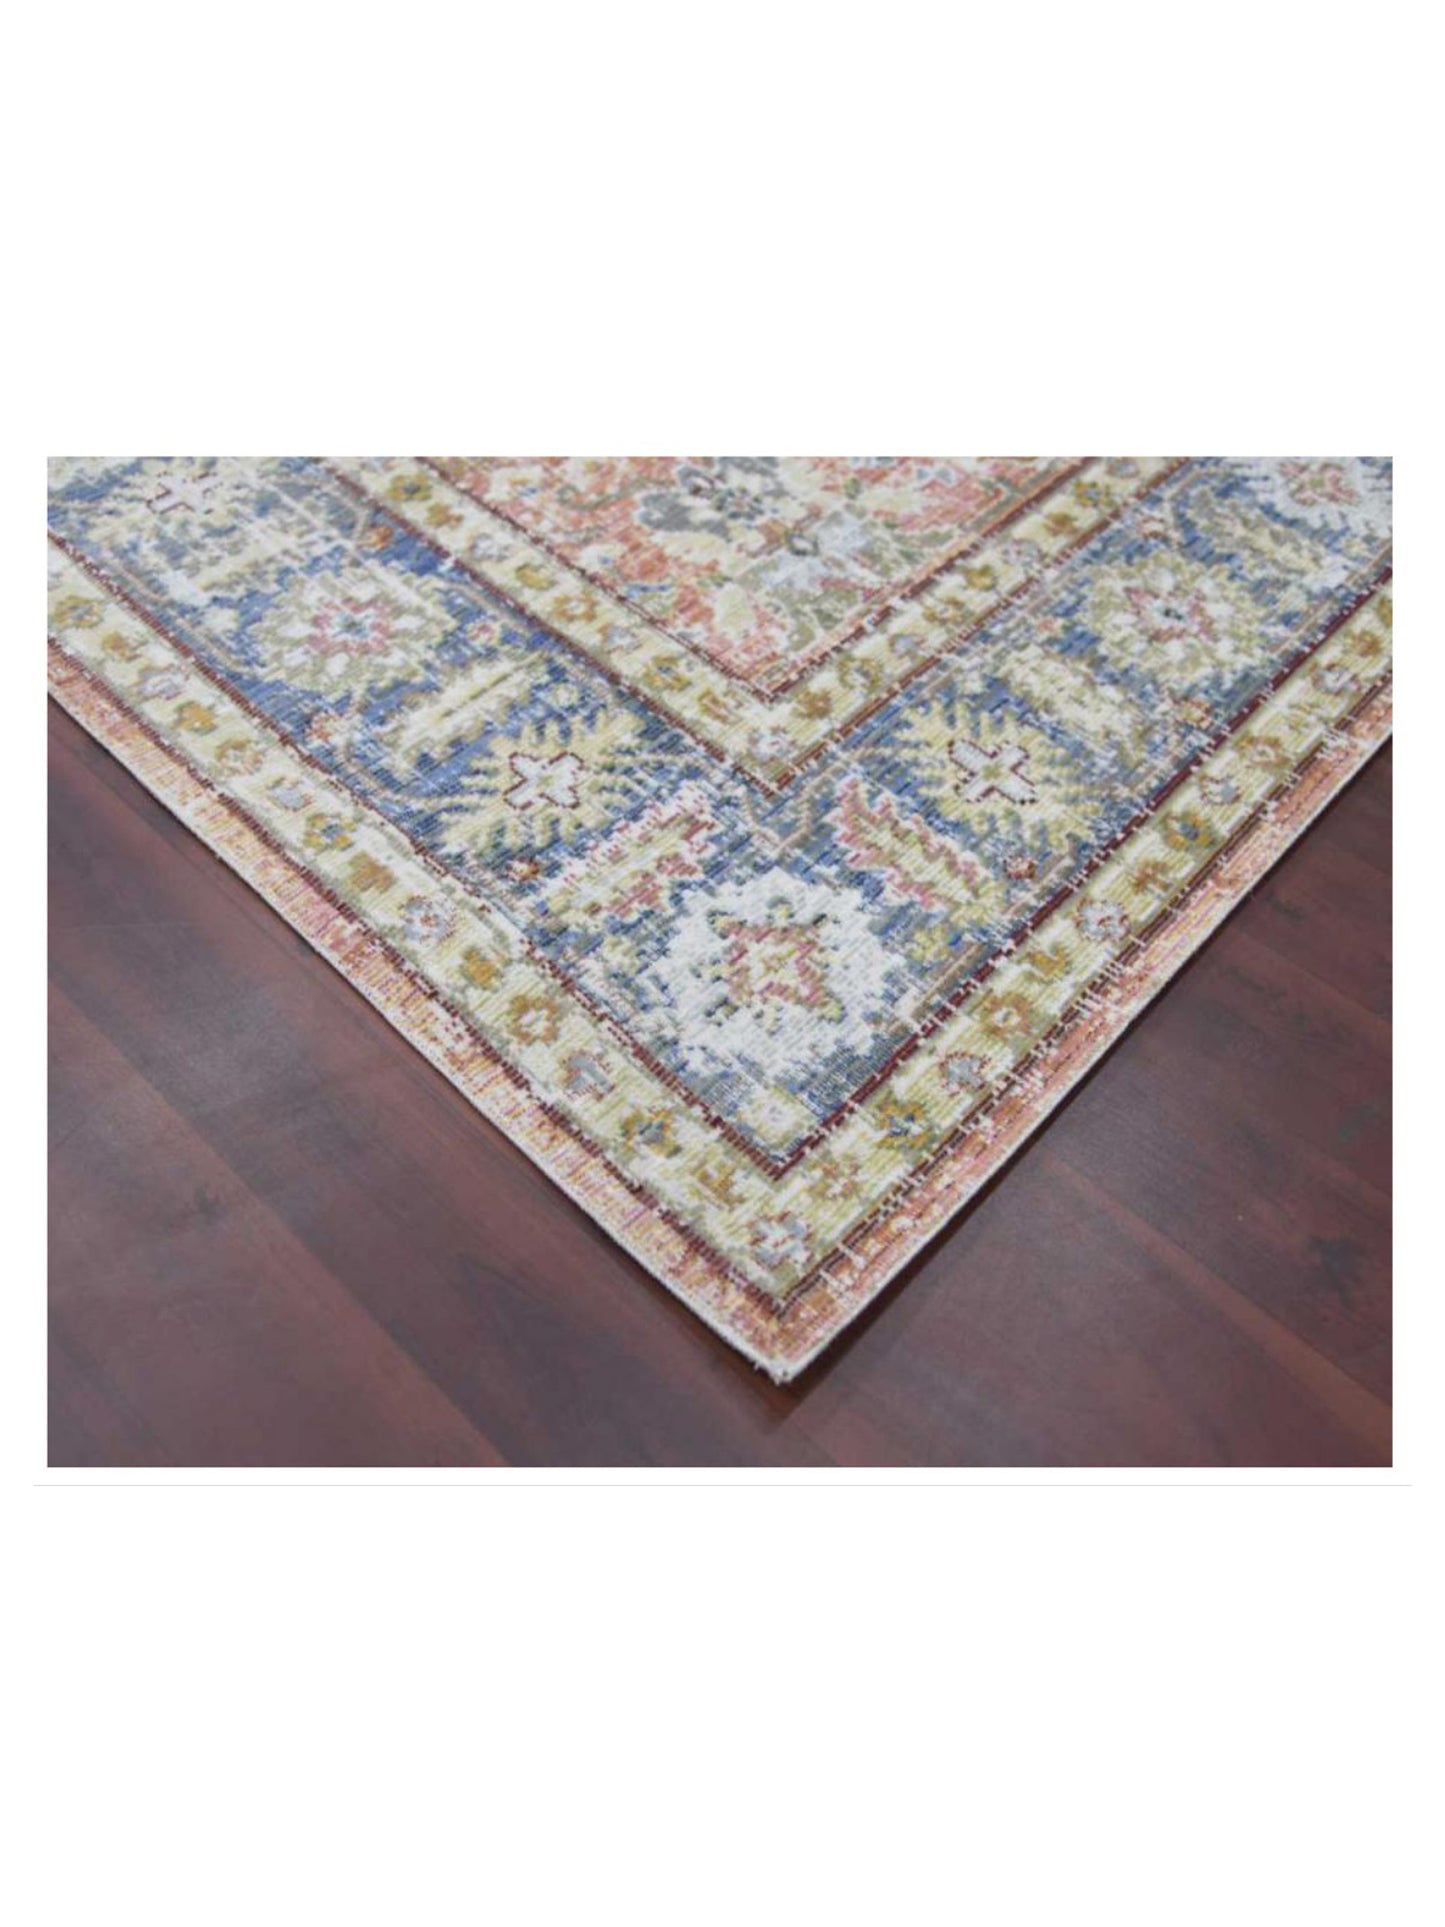 Limited Odeya OR-805 LIVING CORAL Traditional Machinemade Rug